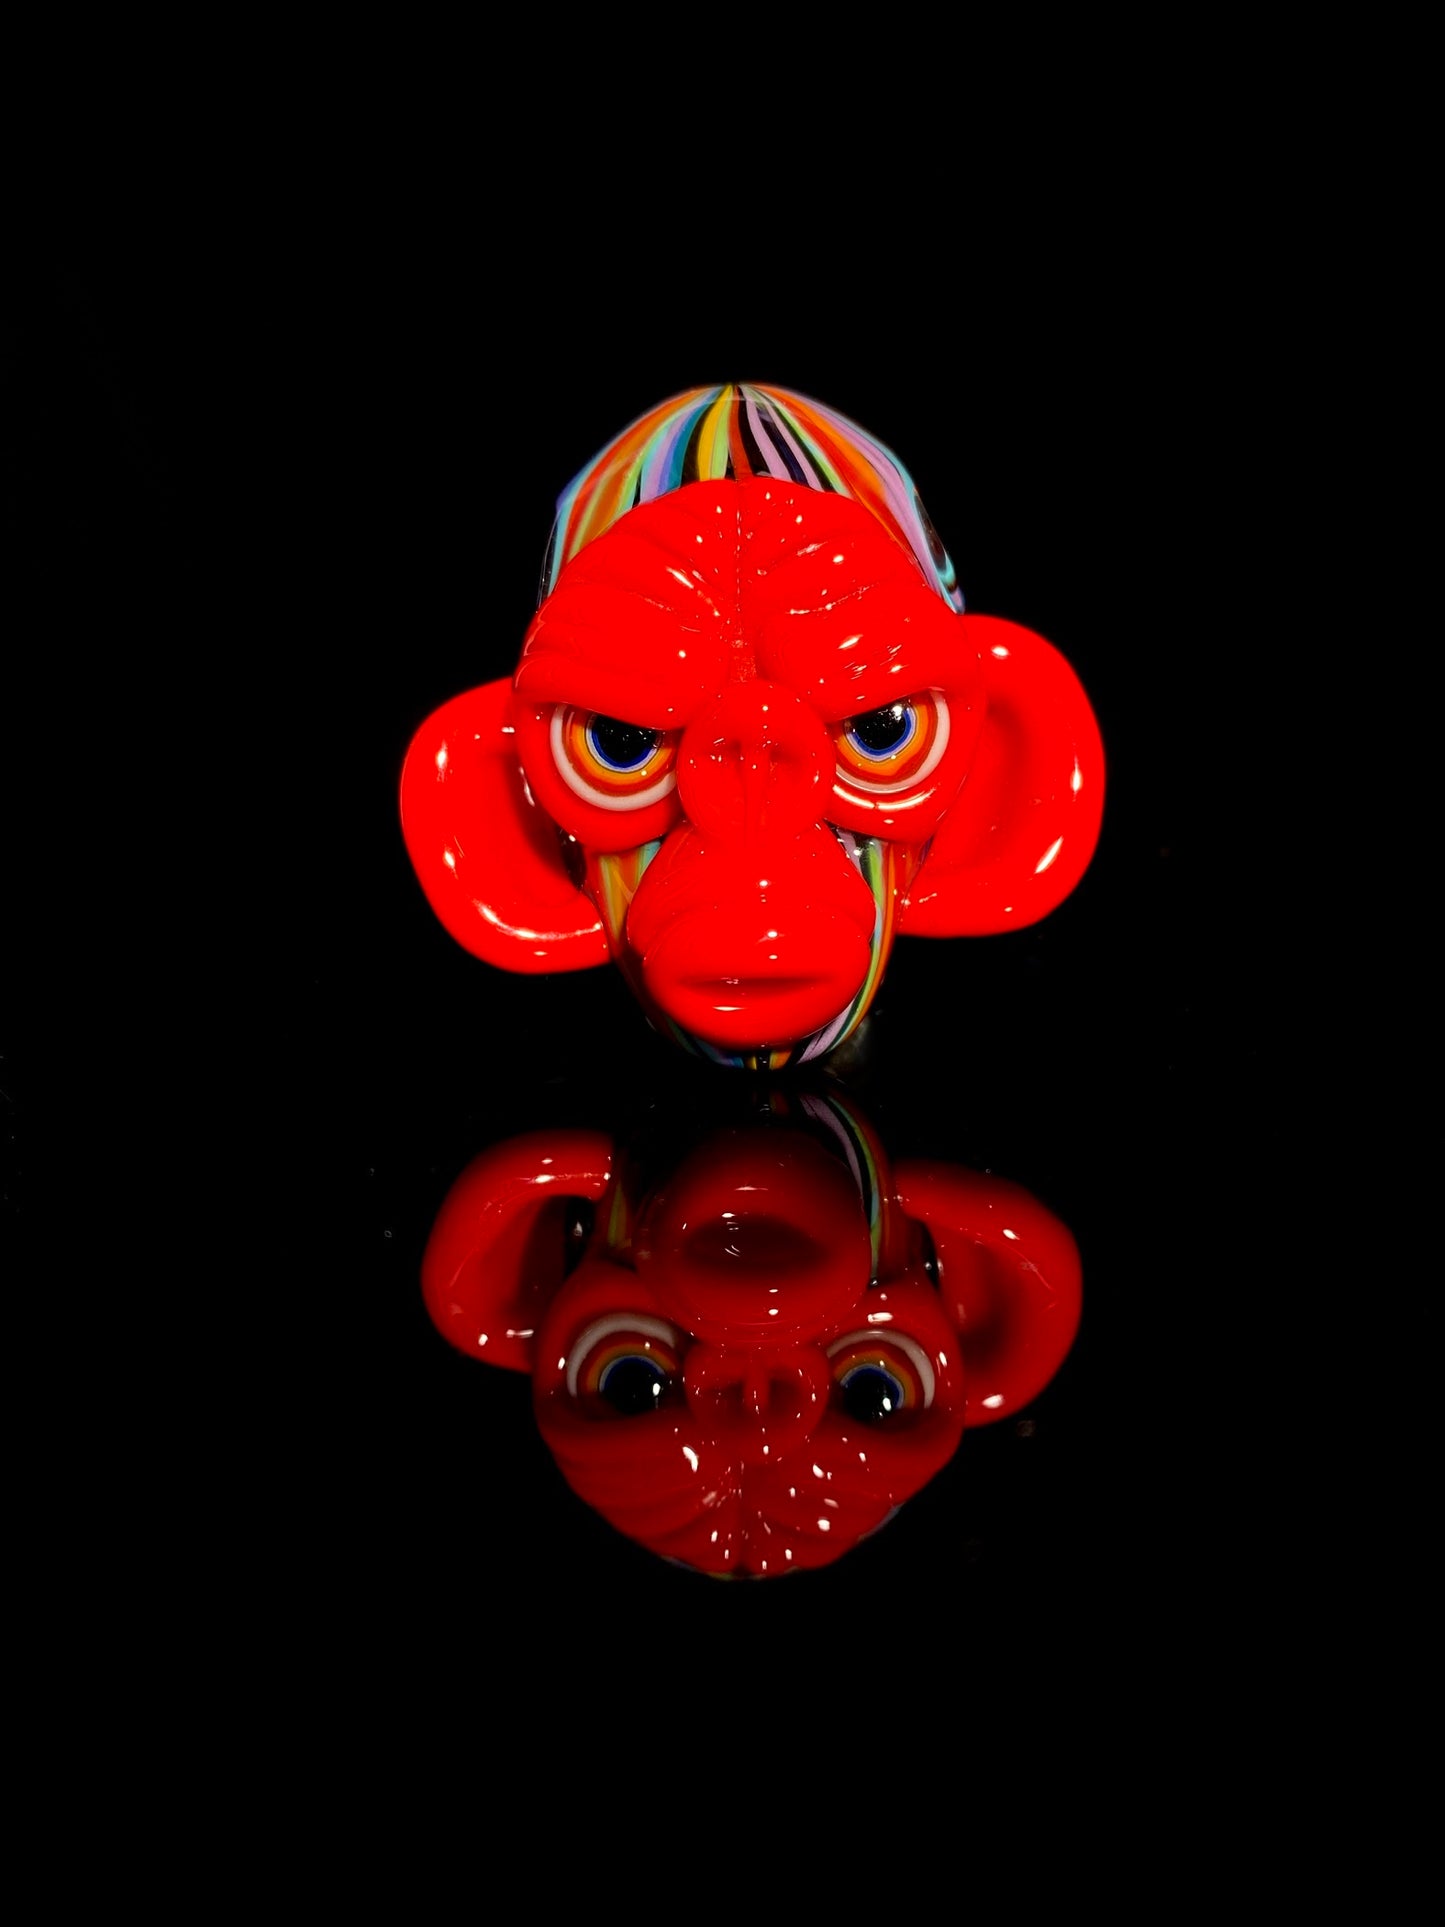 Monkey on Bold Pendant by Coyle Glass x Trip A (Coogi Zoo)